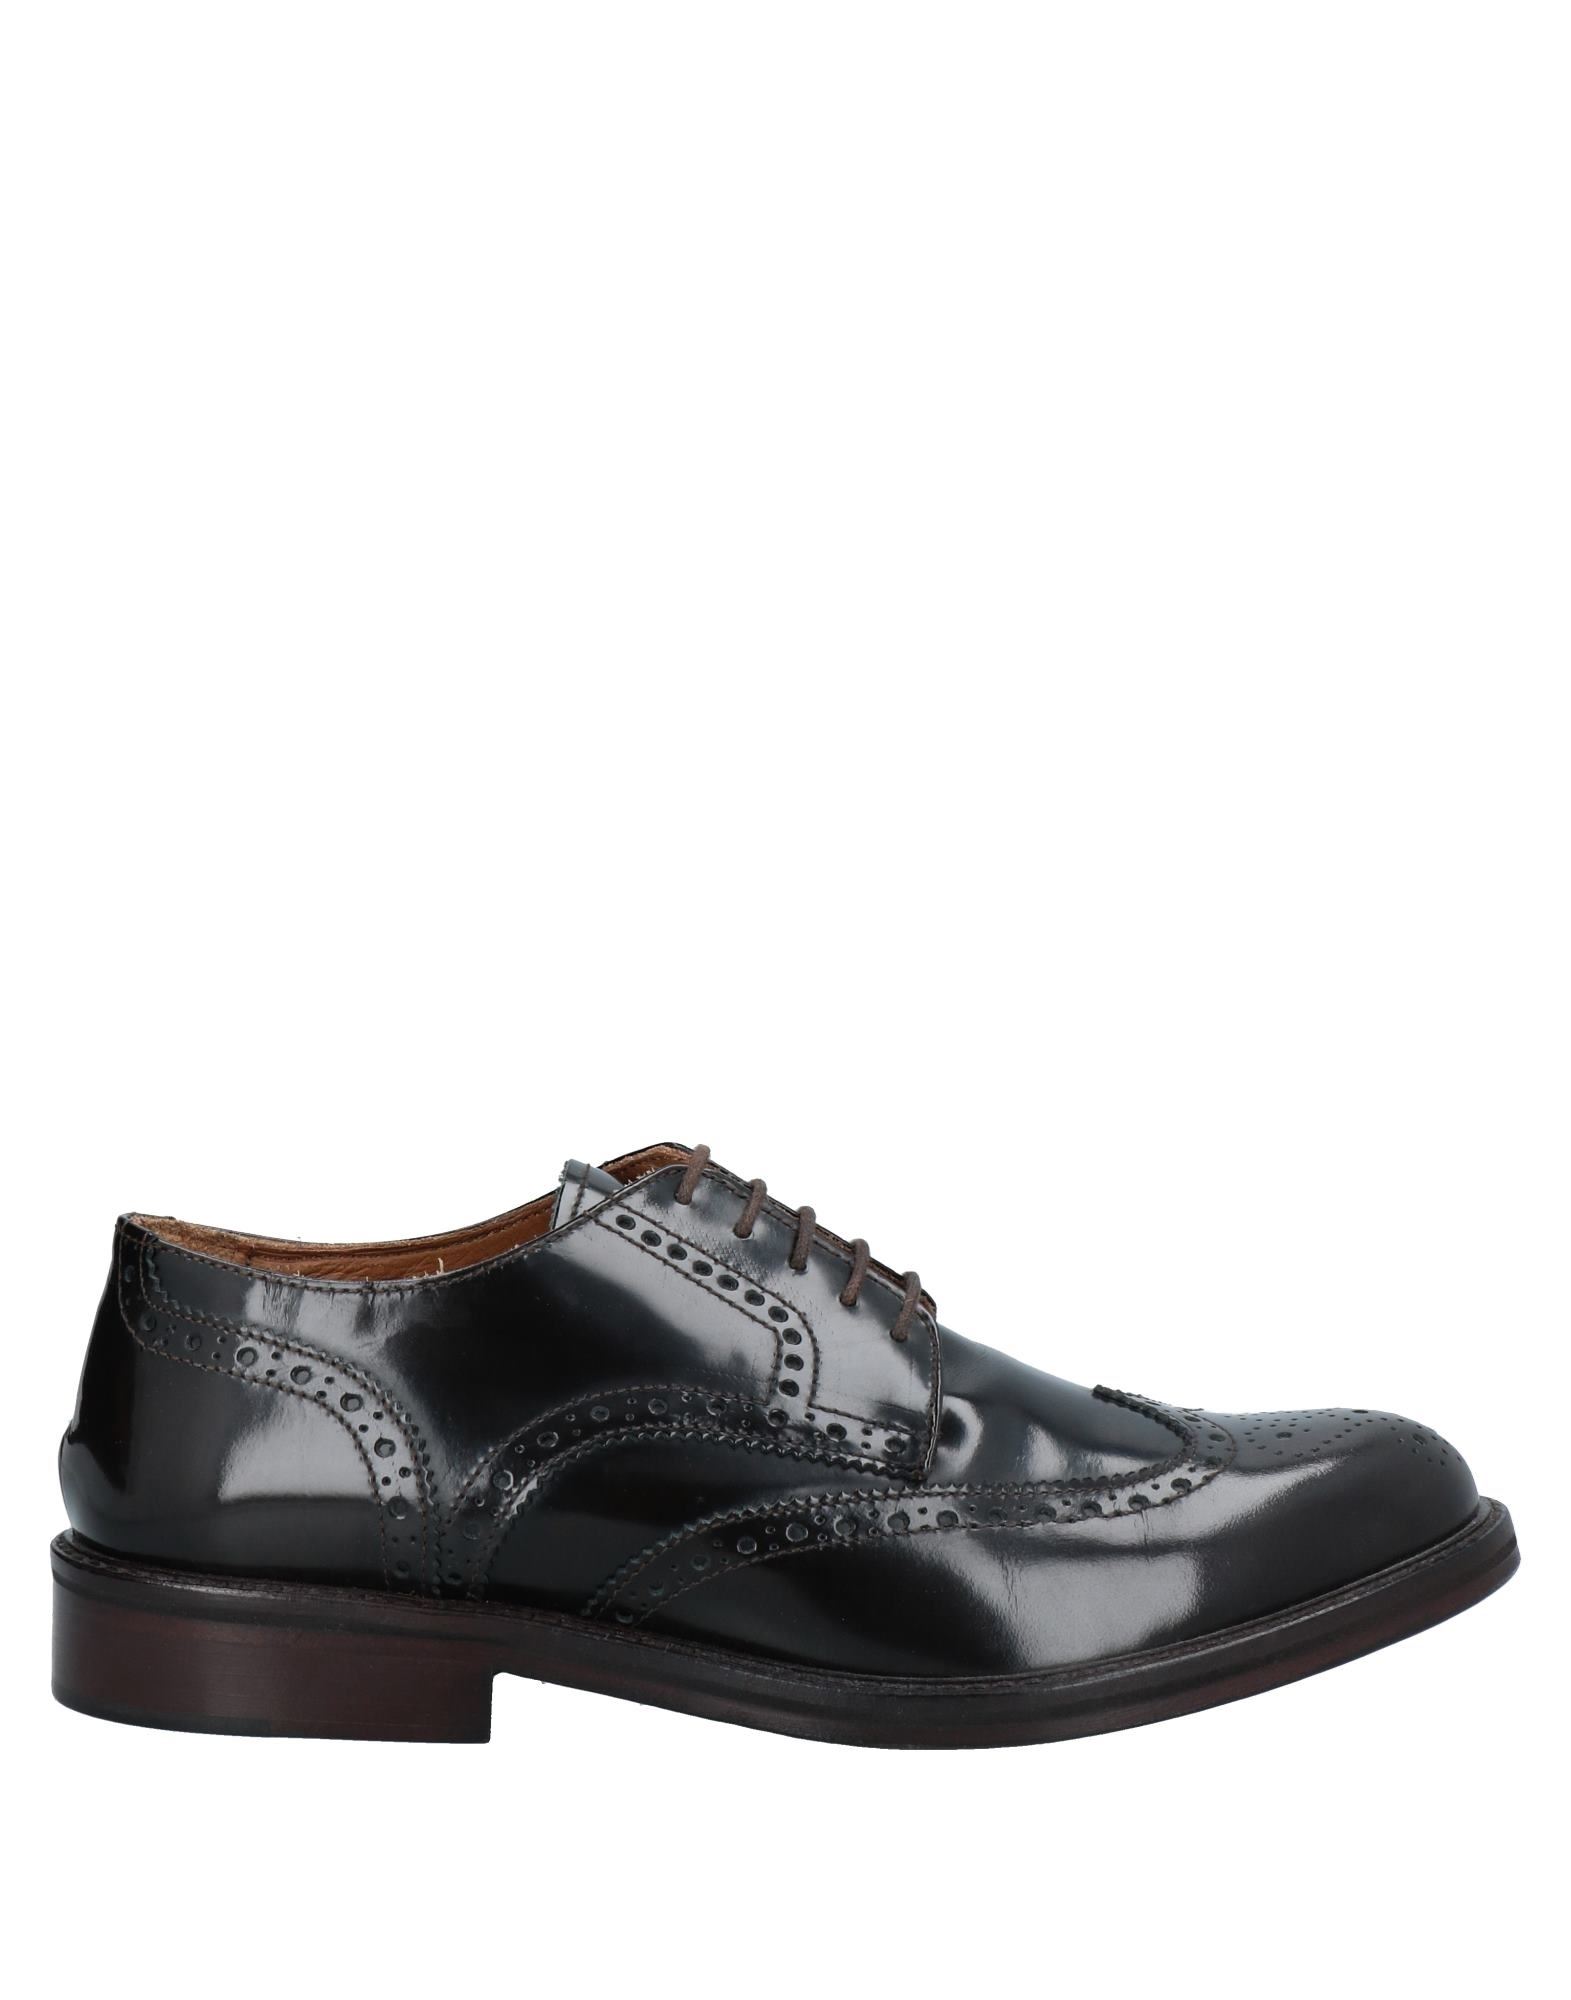 Marechiaro 1962 Lace-up Shoes In Brown